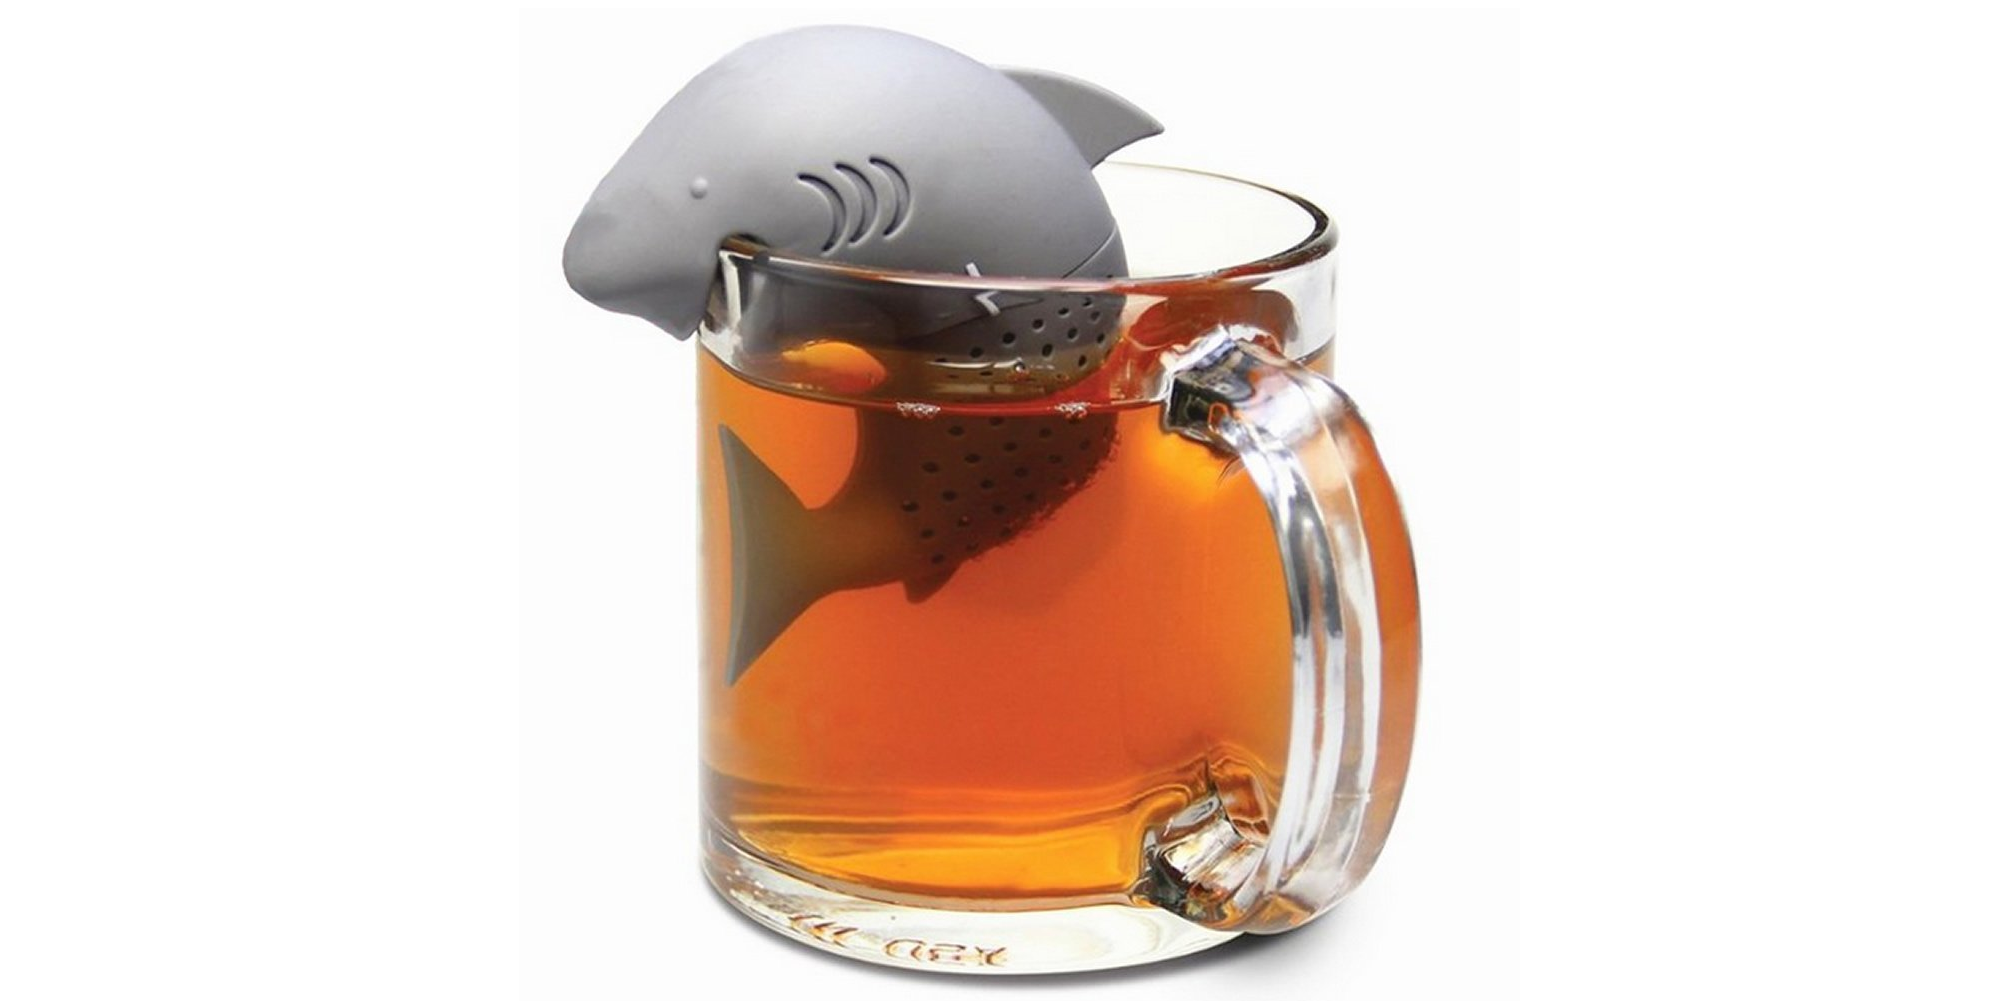 Adorable!! Silicone Shark Tea Infuser Only $3.82 SHIPPED!